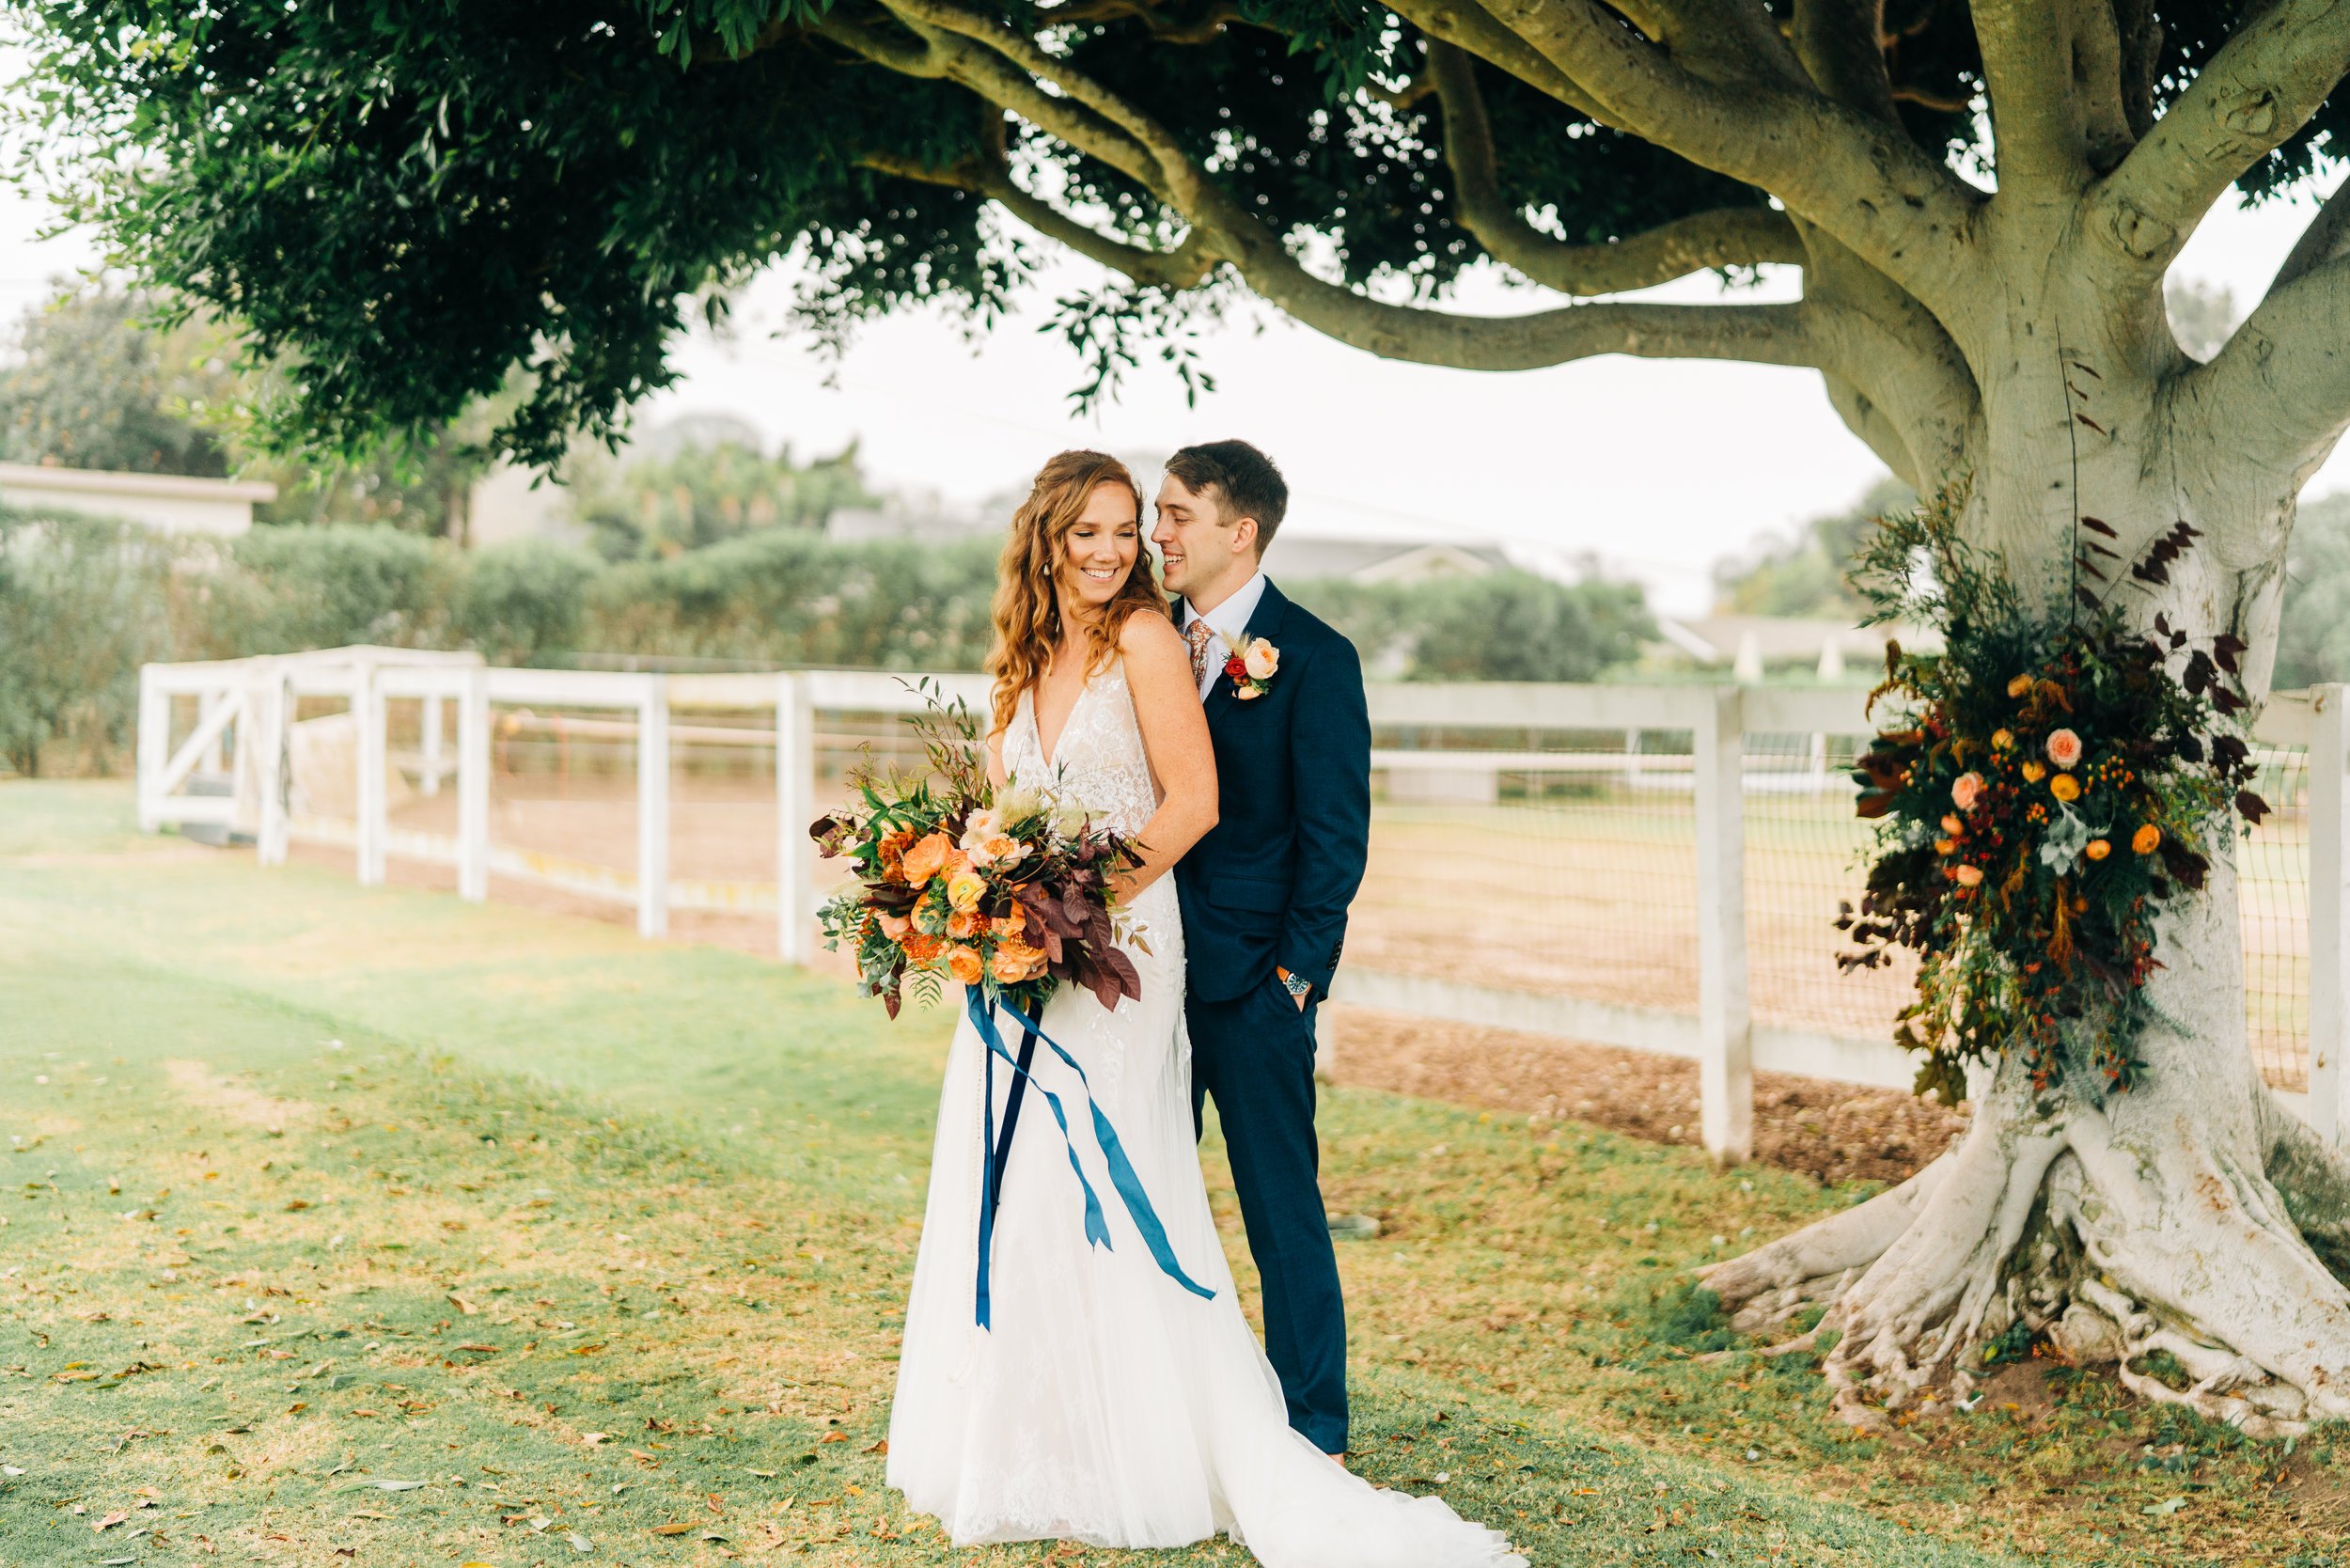 www.santabarbarawedding.com | Brandon Bibbins Photography | The Cottages at Polo Run | Christina Welch Floral | Couple Shares a Moment